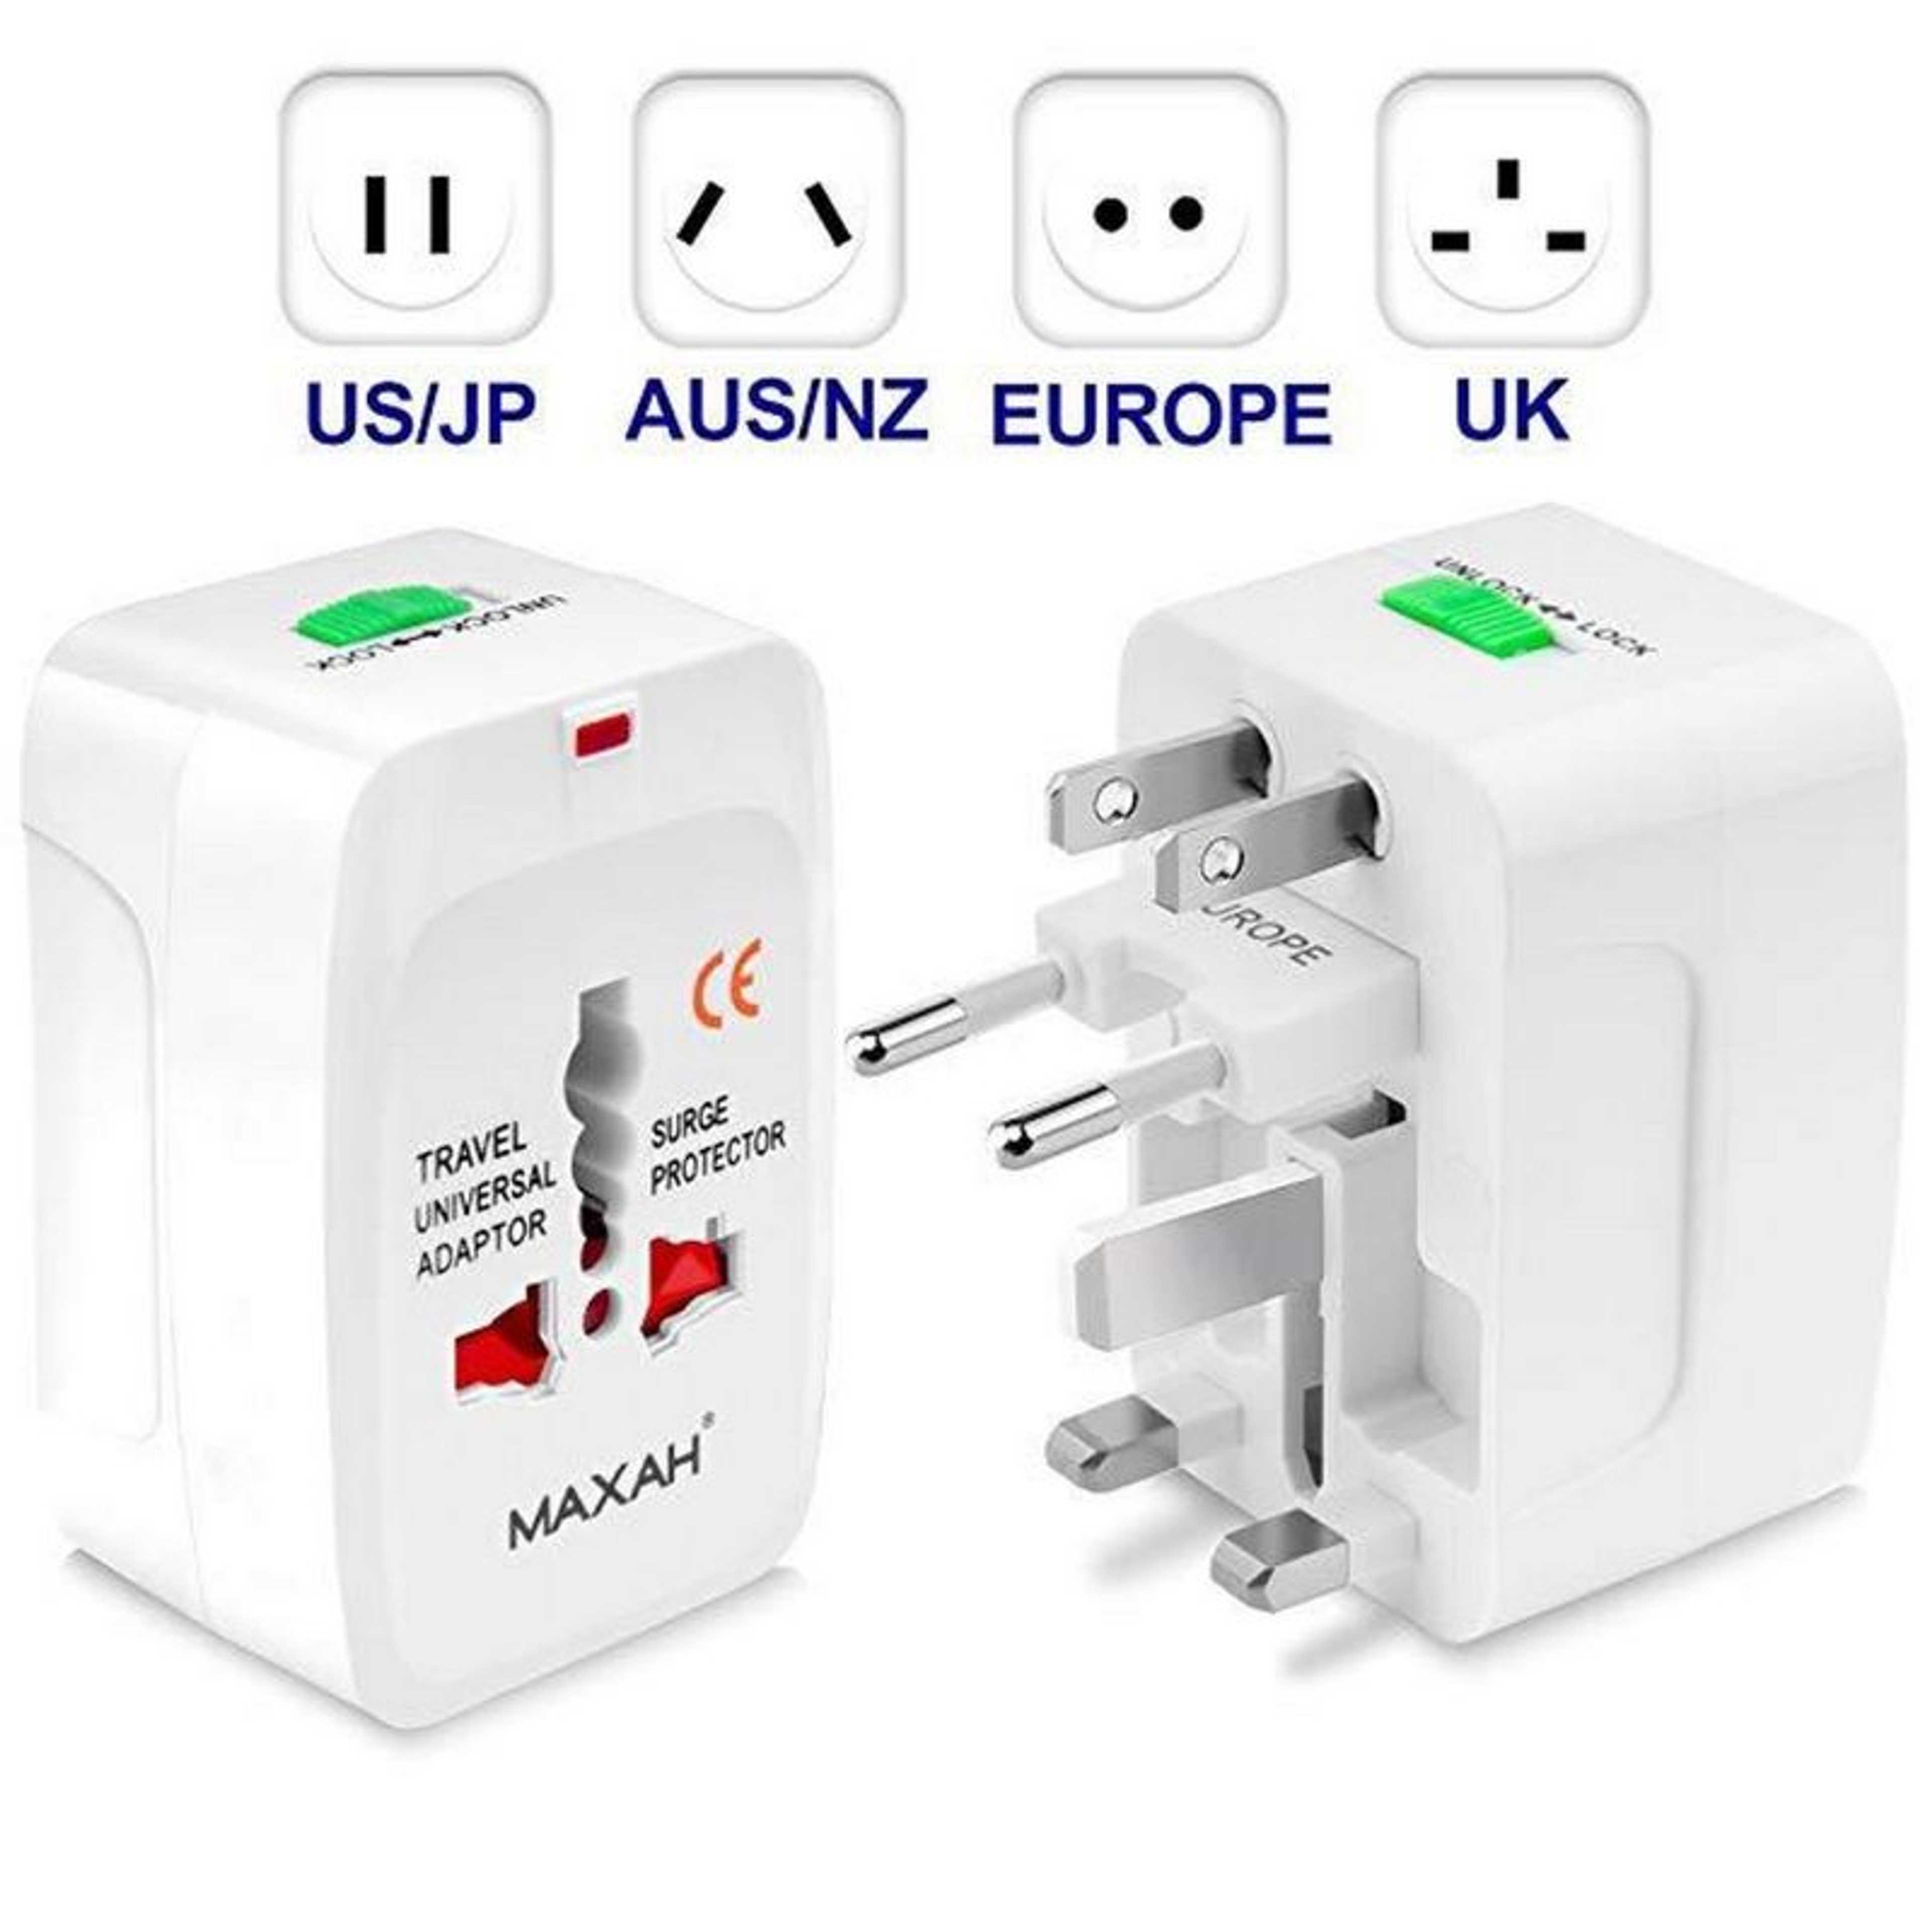 Surge Protector All in One Universal Worldwide Travel Wall Charger Adapter AC Power AU UK US EU Conversion Plug Adaptor